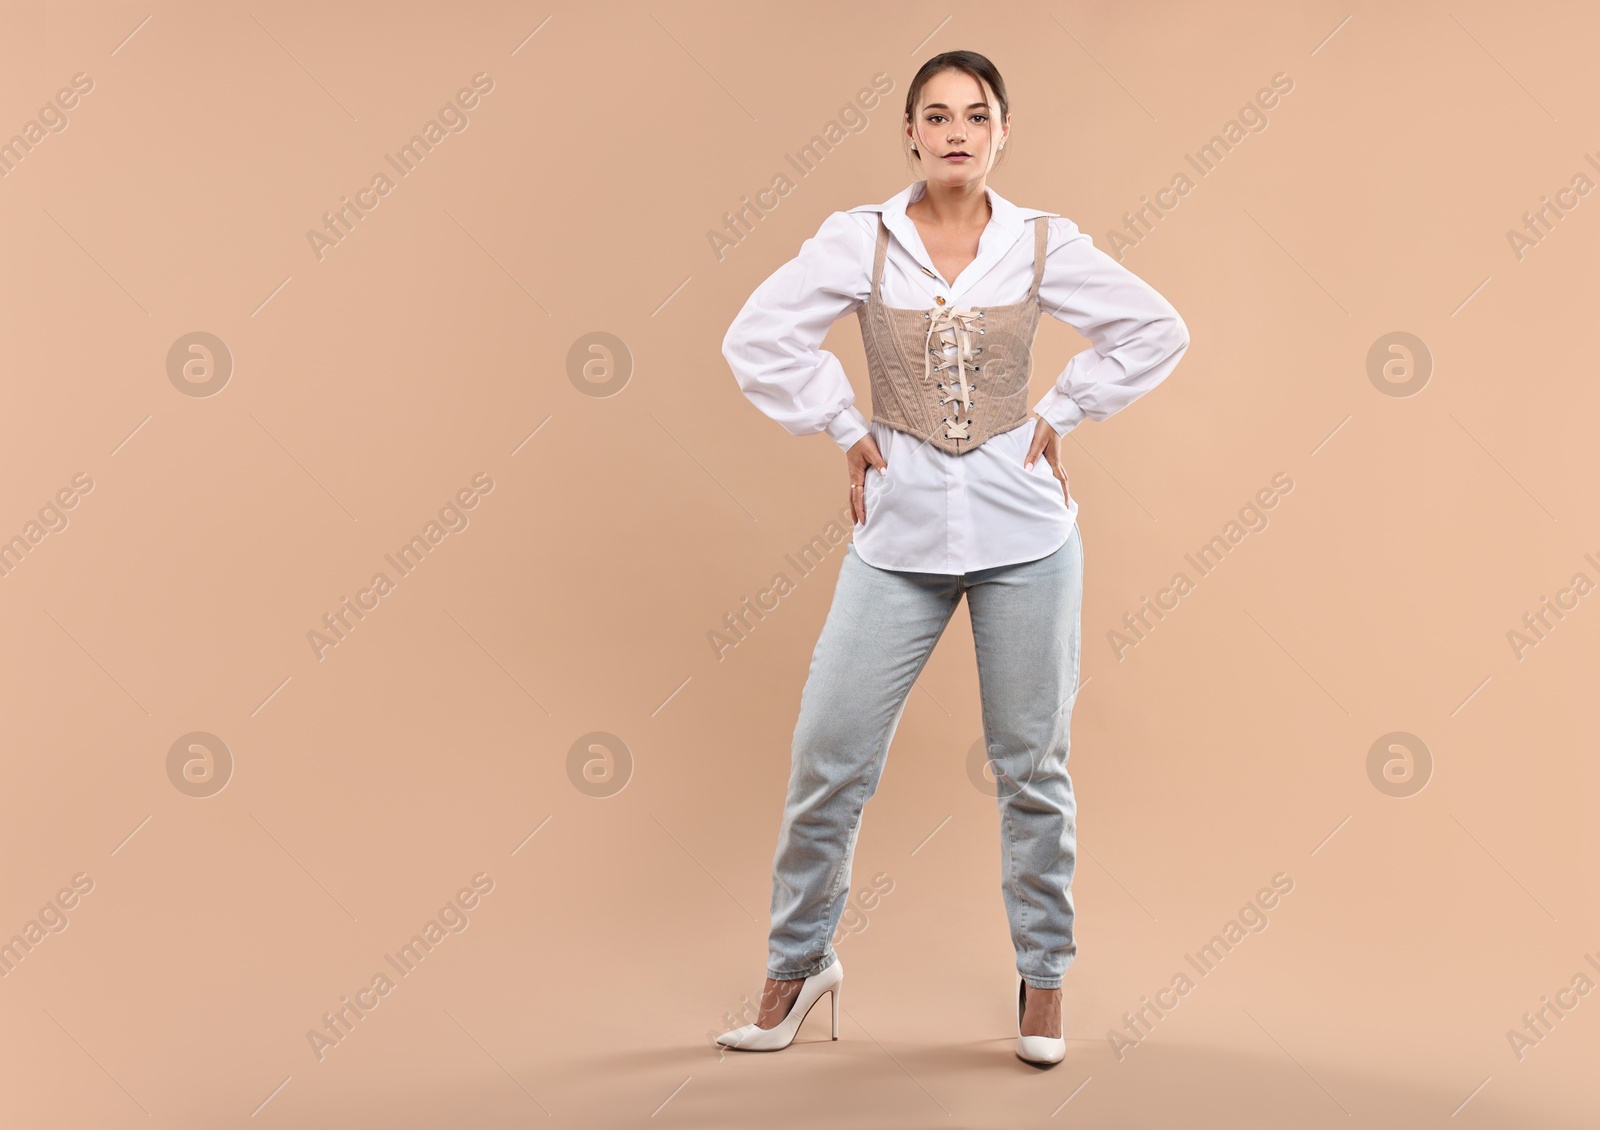 Photo of Beautiful woman in stylish corset posing on beige background. Space for text